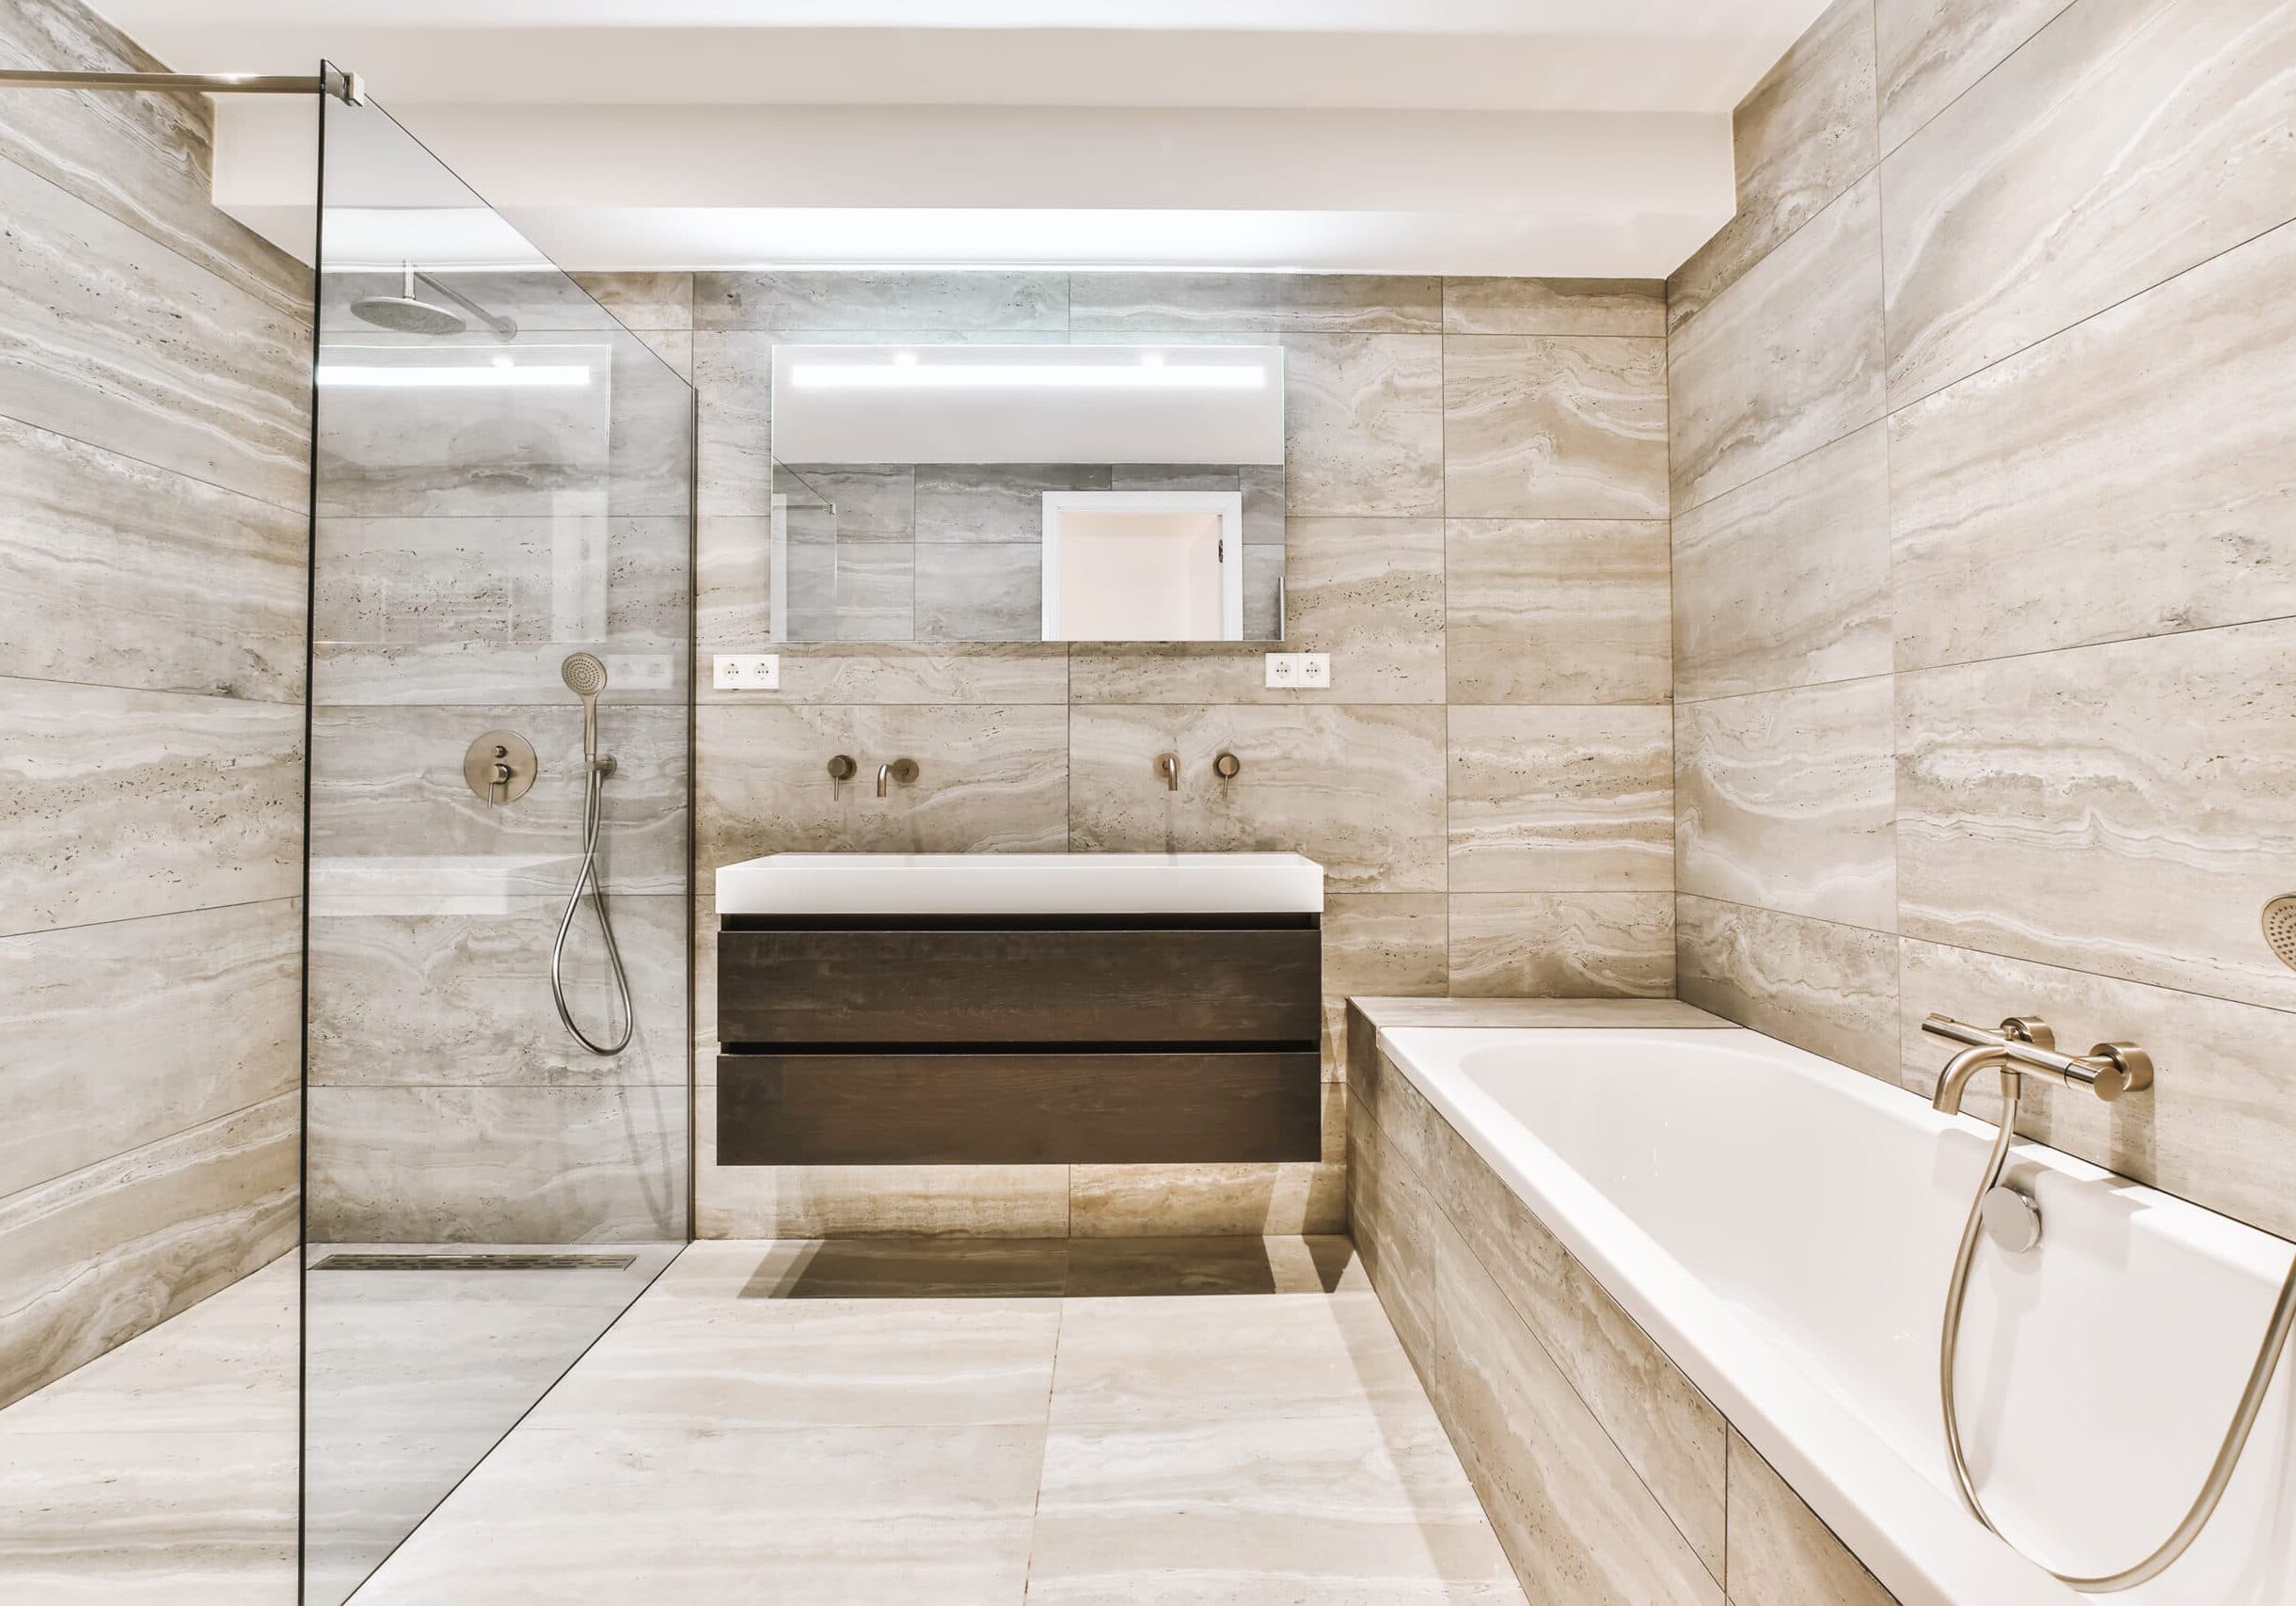 Luxury interior design of a bathroom with marble walls